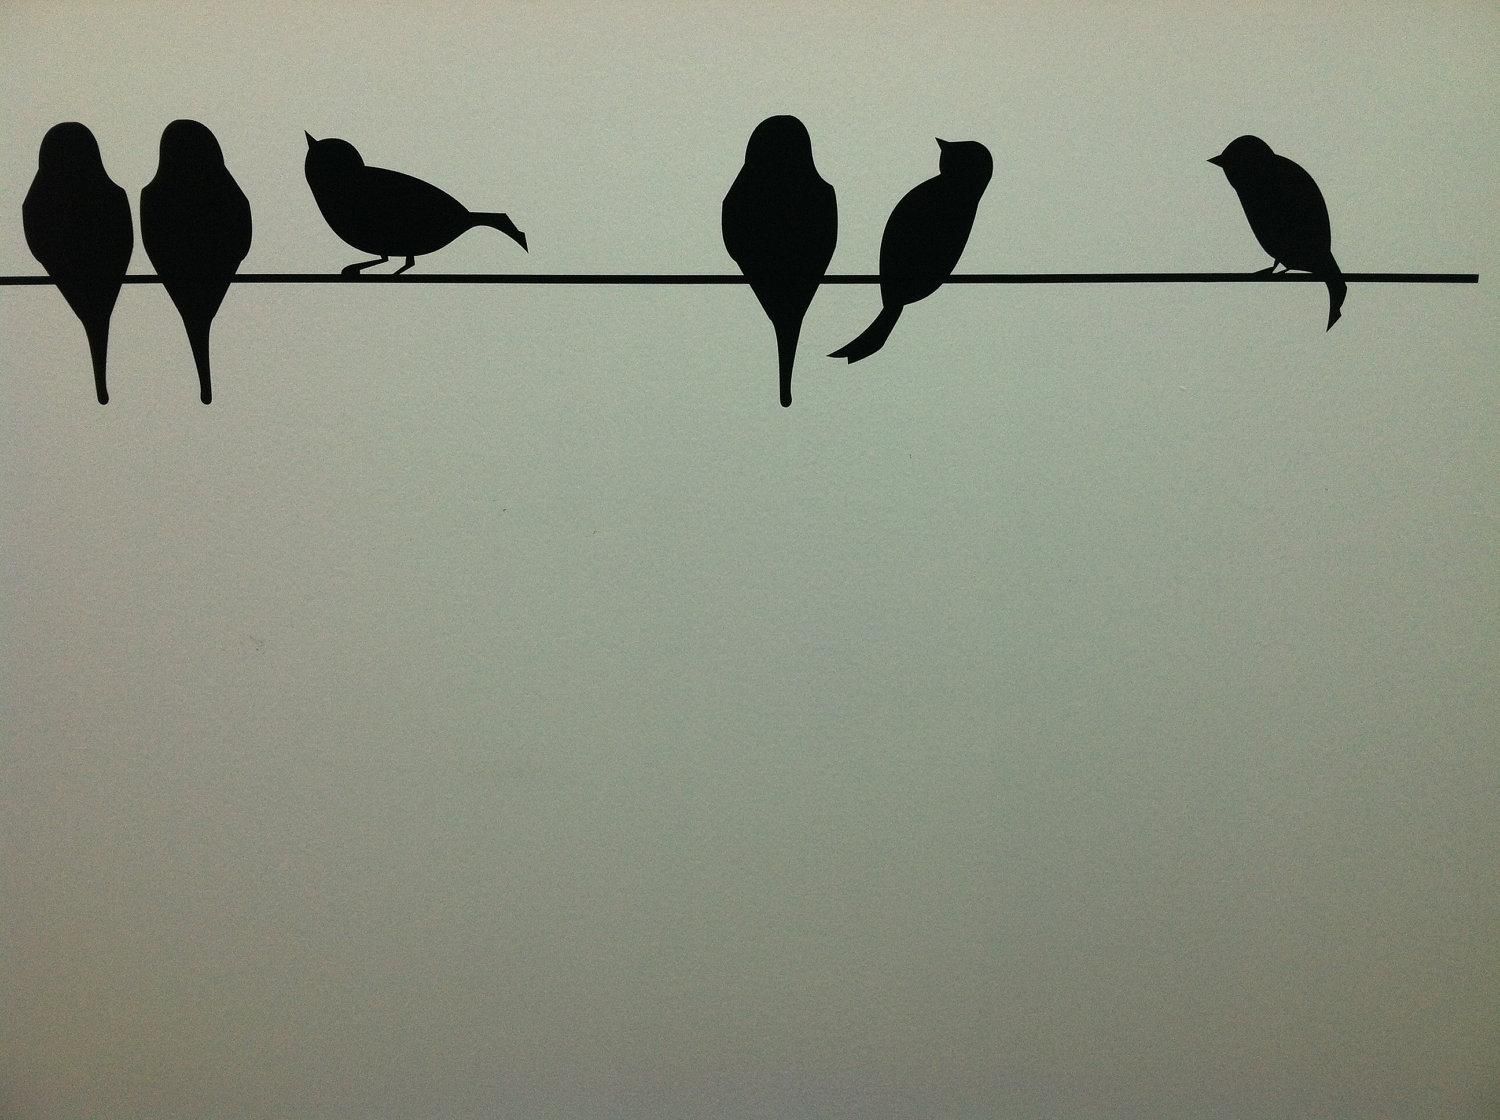 Birds On A Wire Vinyl Lettering Art Decal Wall Sticker With Birds On A Wire Wall Art (View 6 of 20)